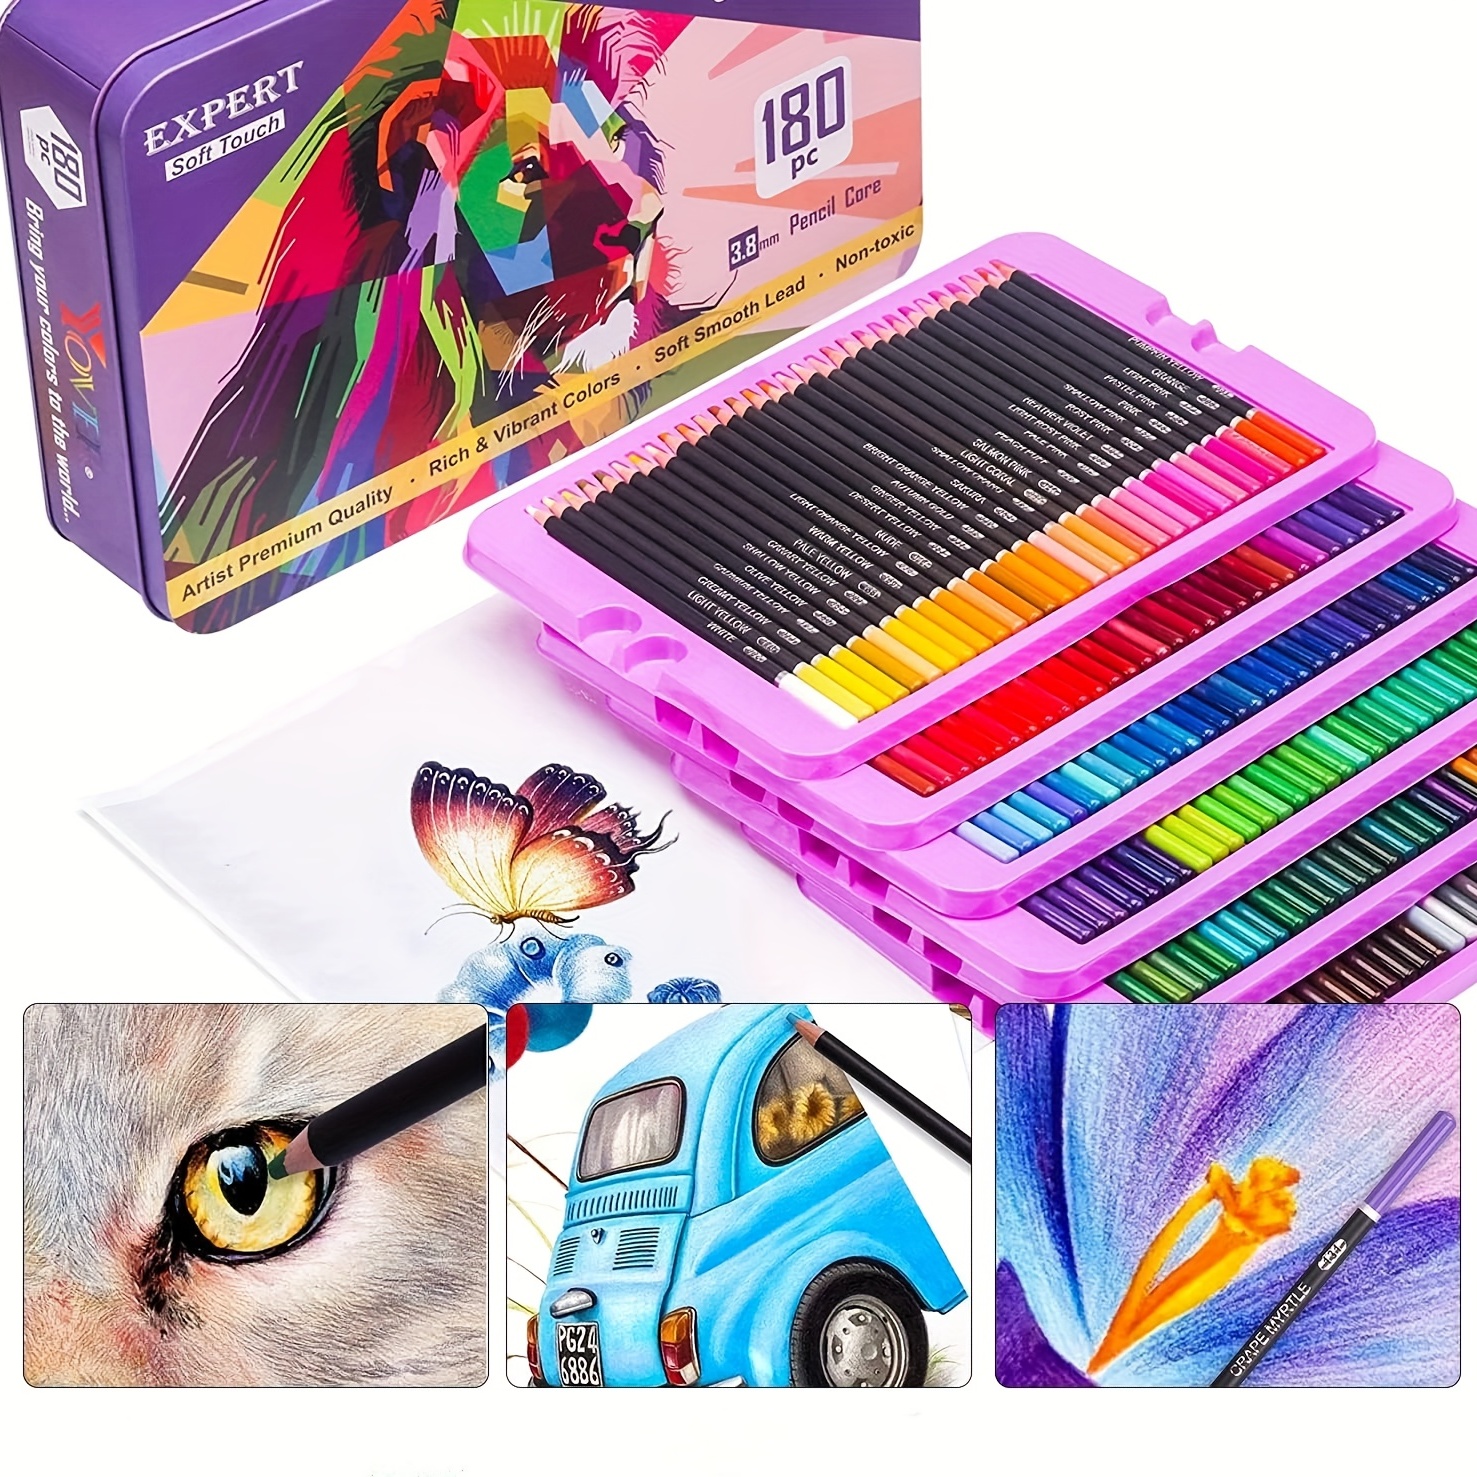  180 Professional Colored Pencils, Artist Pencils Set for  Coloring Books, Premium Artist Soft Core with Vibrant Colors for Sketching  Shading Blending Coloring, Gift Box for Beginners Adults Artists : Arts